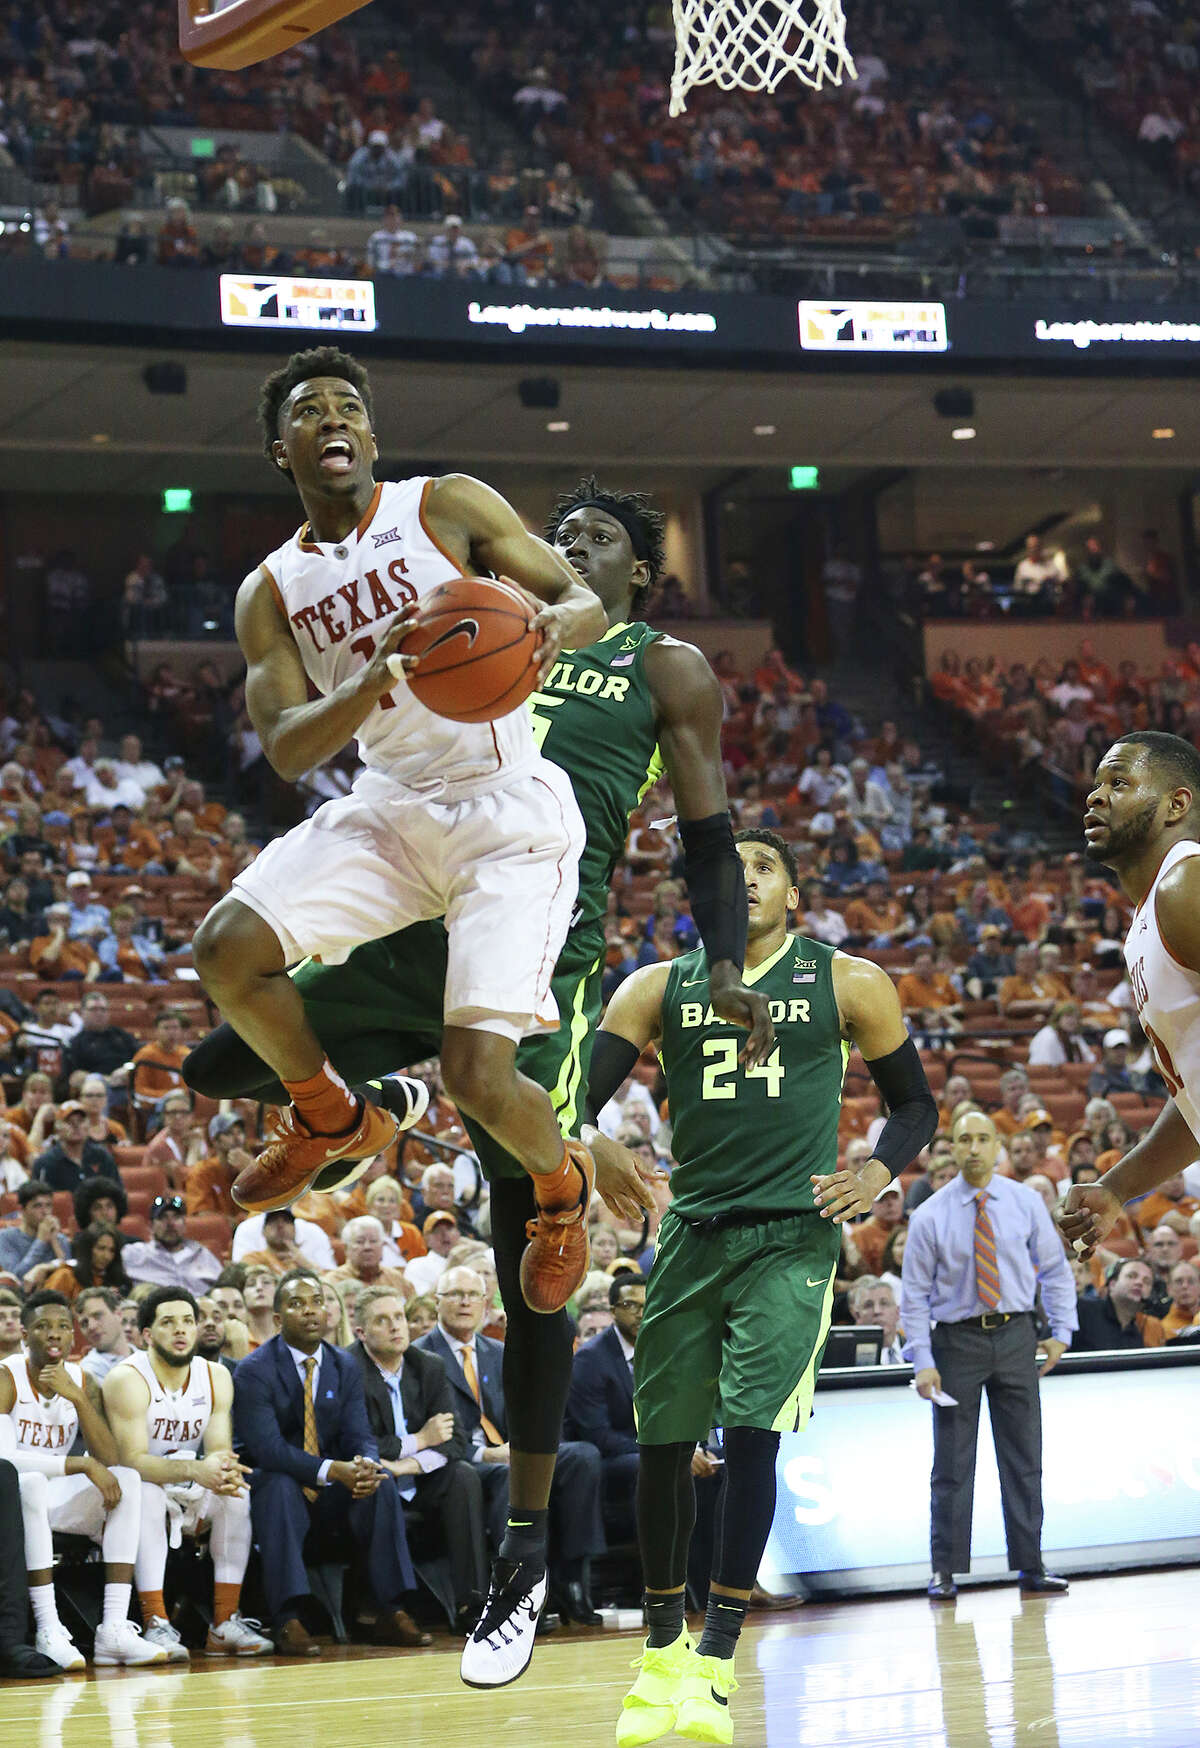 Longhorn guard Isaiah Taylor gets past Johnathan Motley as UT hosts Baylor in men's basketball at the Erwin Center on February 20, 2016.